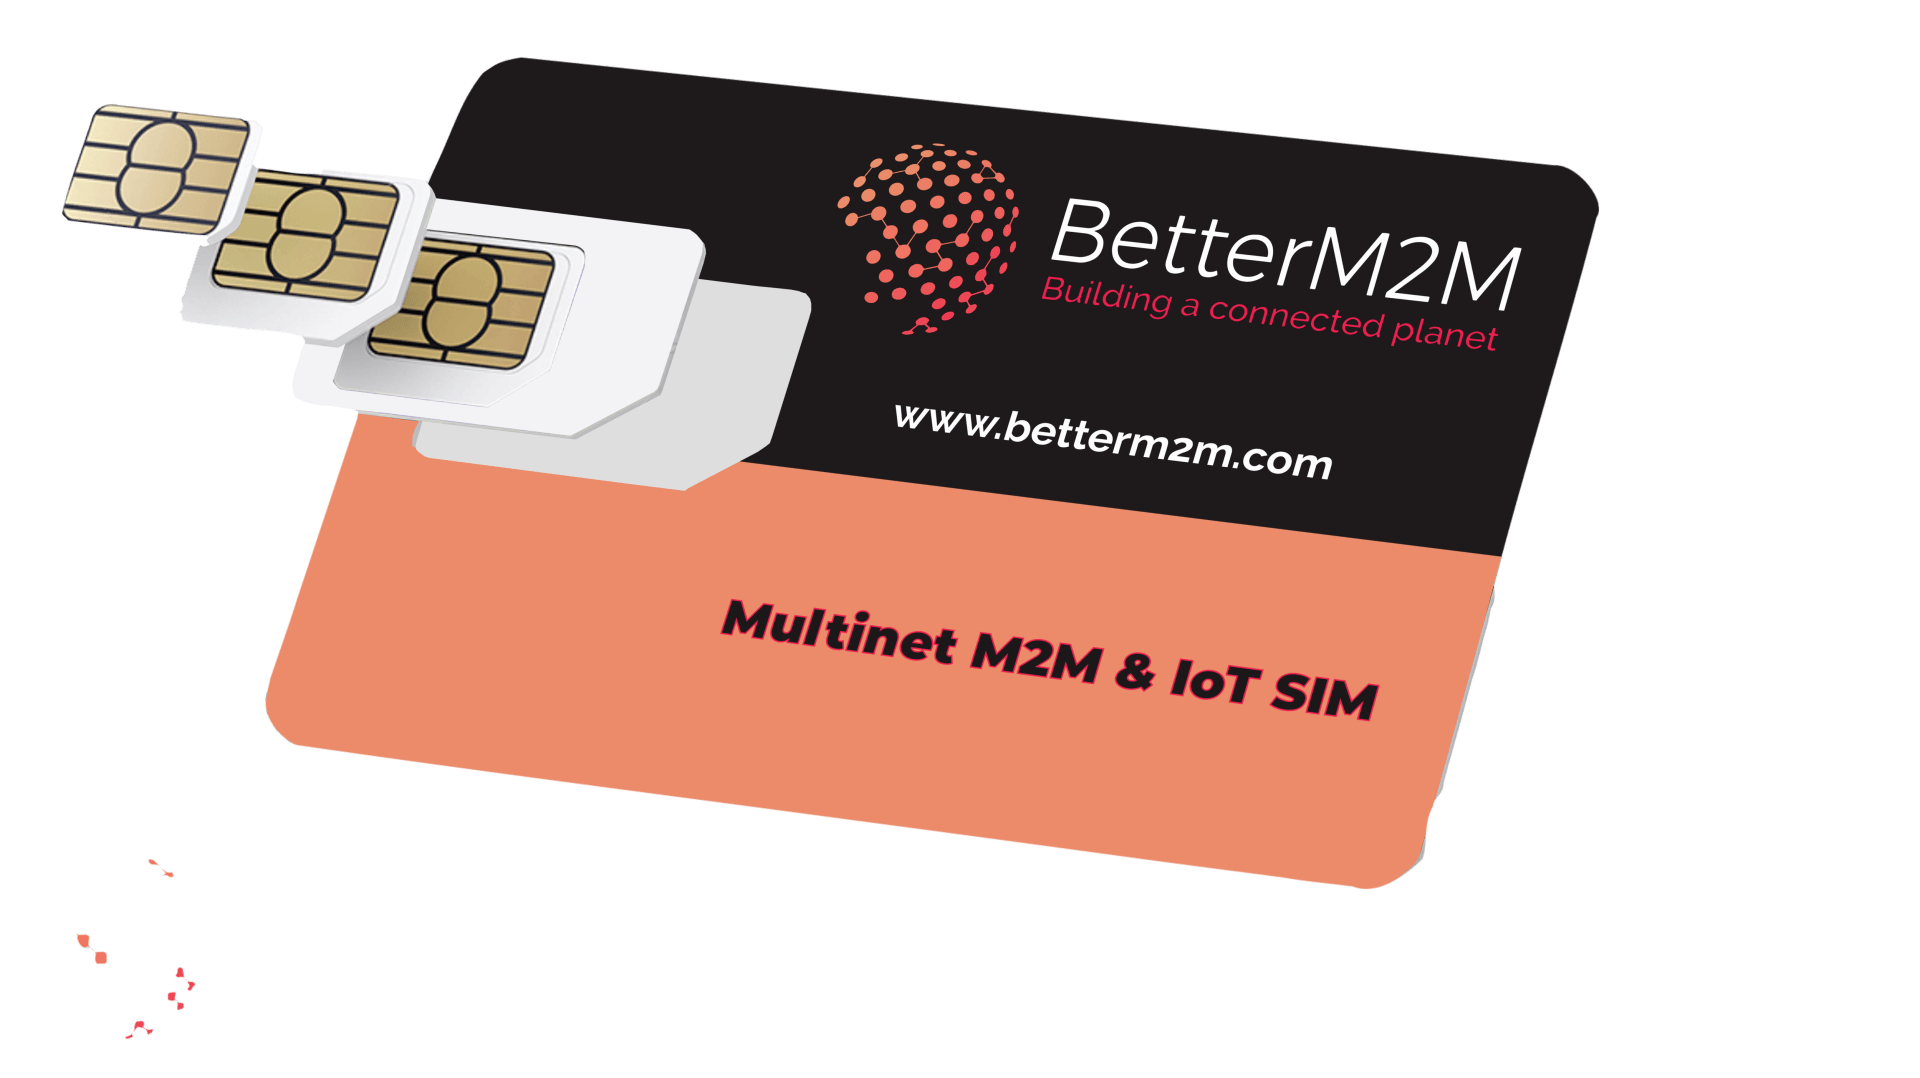 Multinetwork M2M Voice SIM Cards from BetterM2M